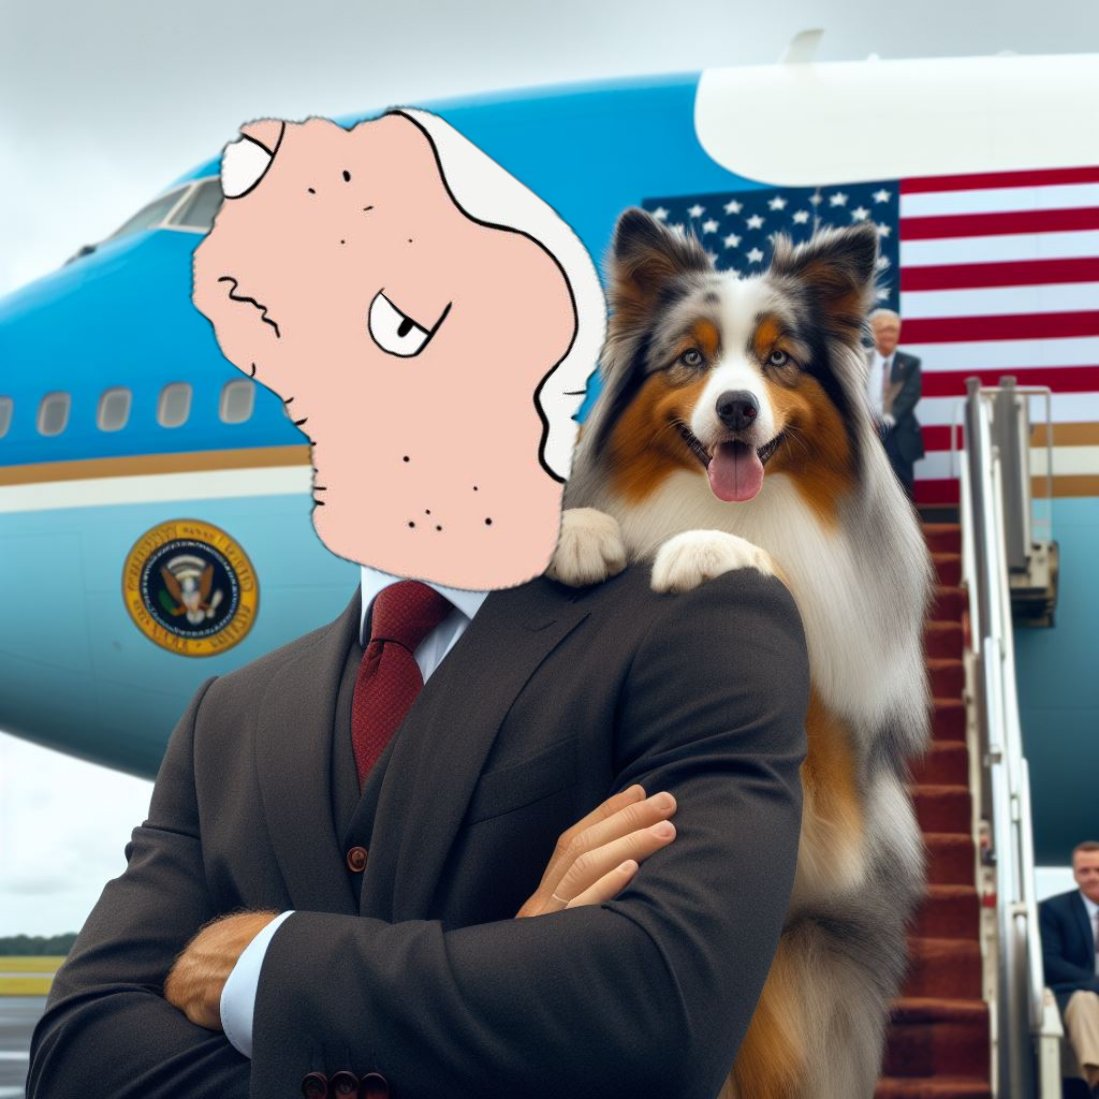 Arctic is now the presidential dog for $BODEN on #Base @BASED_BODEN 
#AIMeme #AstroAussie #BasedBoden #presidentiallifestyle